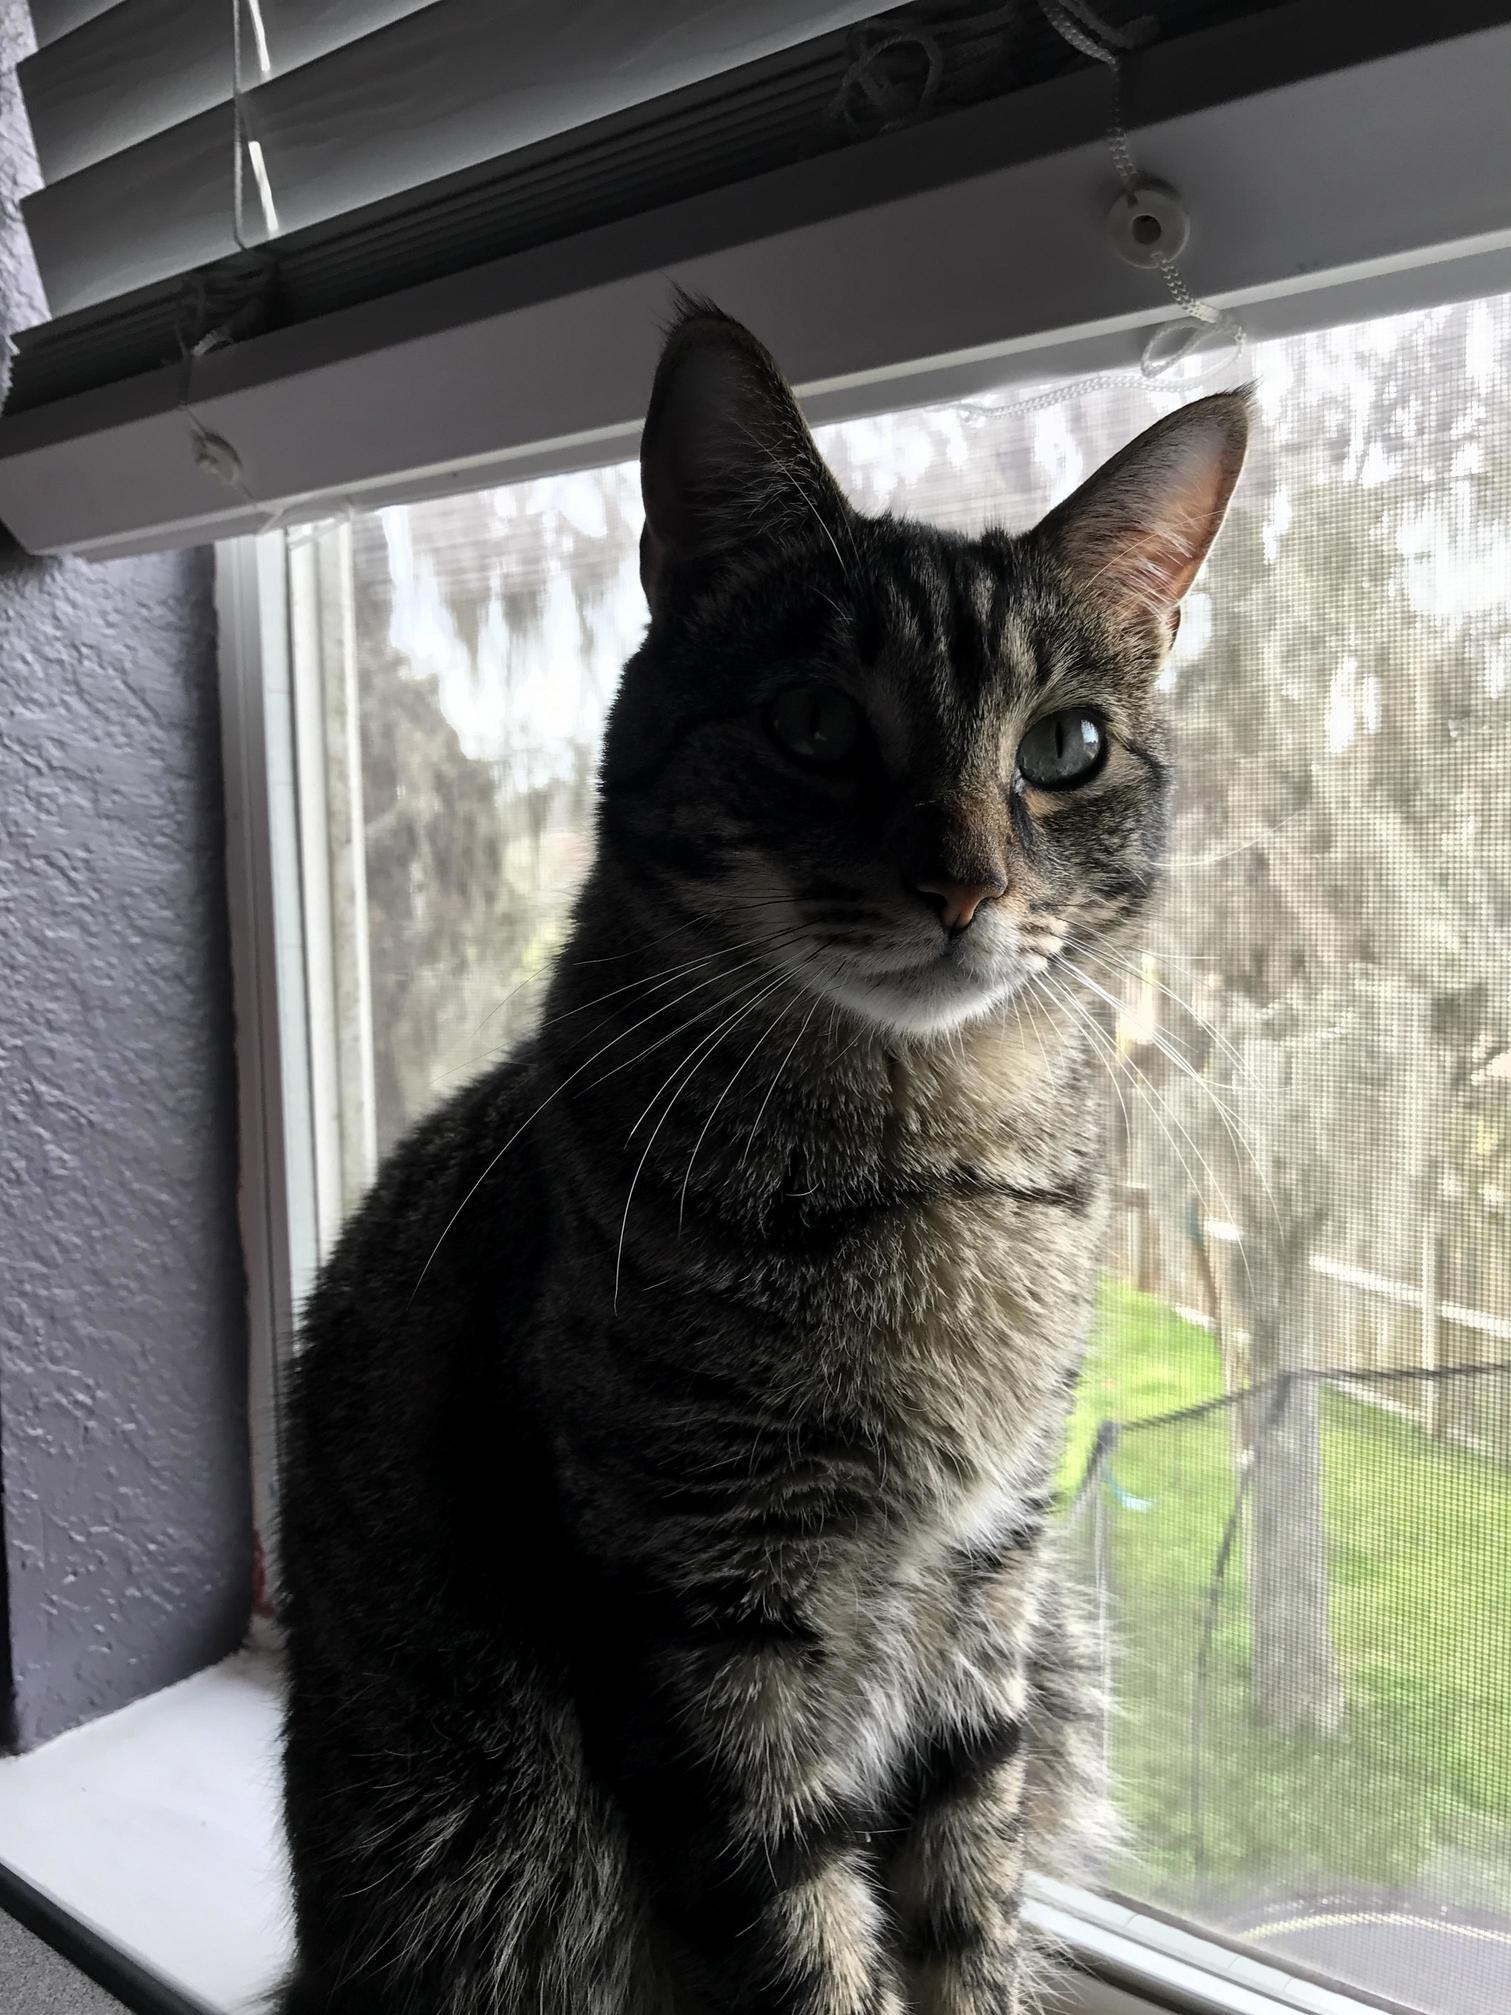 My boy bruce waiting patiently for me to stop working sitting in his favorite window.